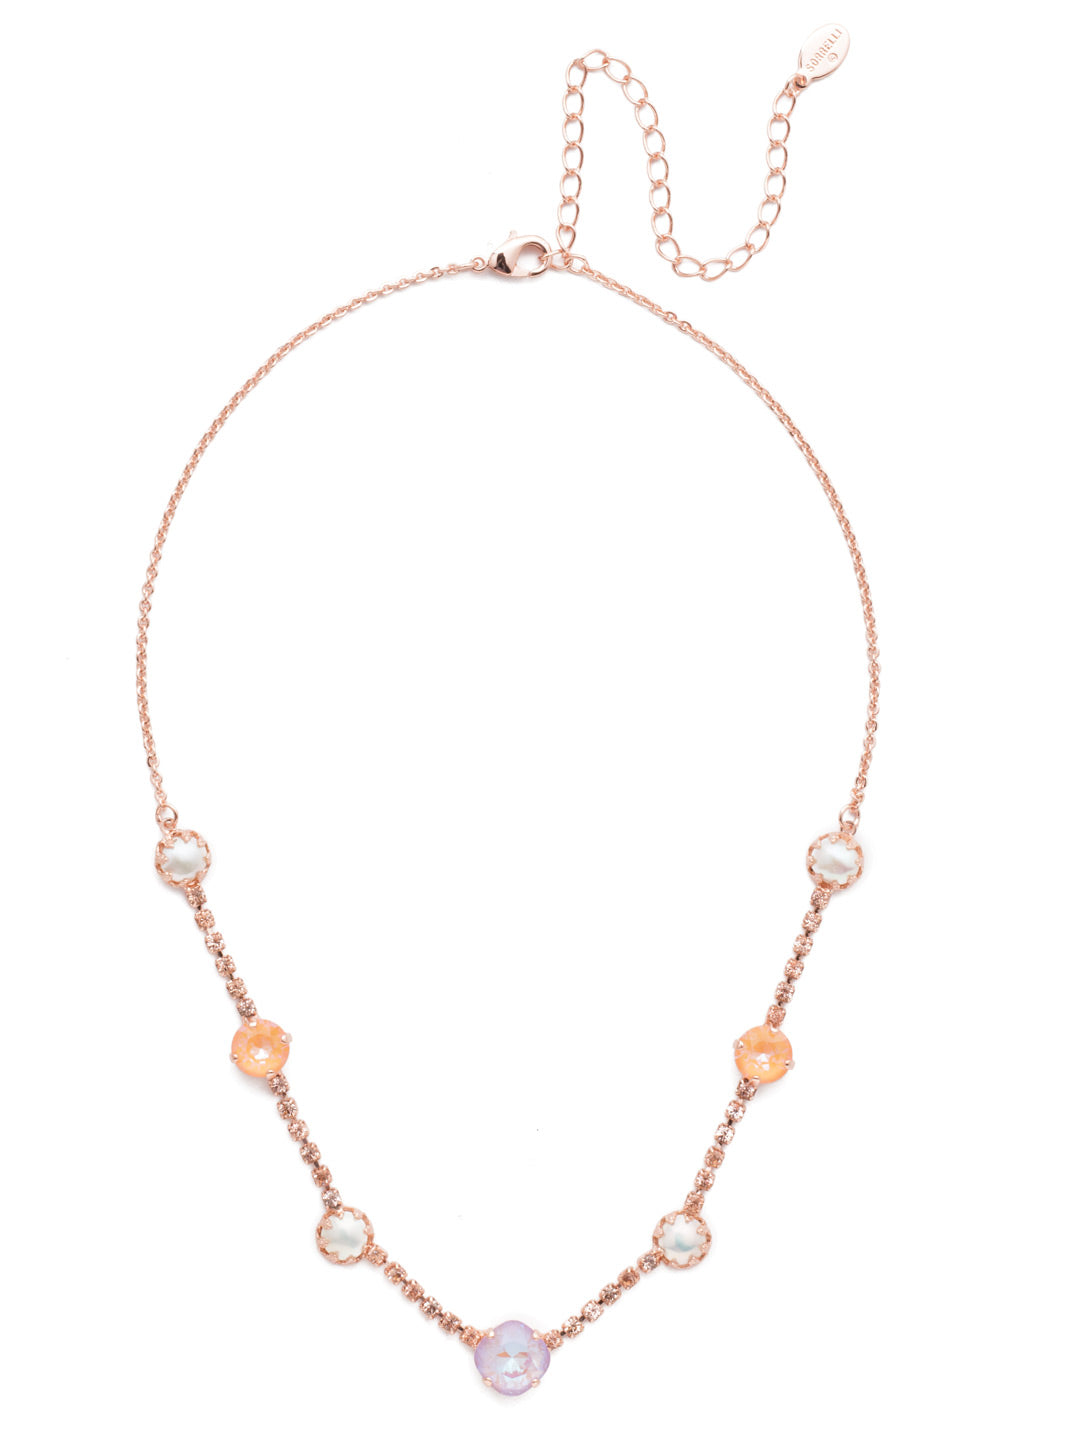 Caterina Tennis Necklace - NES11RGLVP - <p>Our Caterina Tennis Necklace is traditional style plus something extra with links of sparkling crystals bringing together bigger, bolder stones and pretty pearls. From Sorrelli's Lavender Peach collection in our Rose Gold-tone finish.</p>